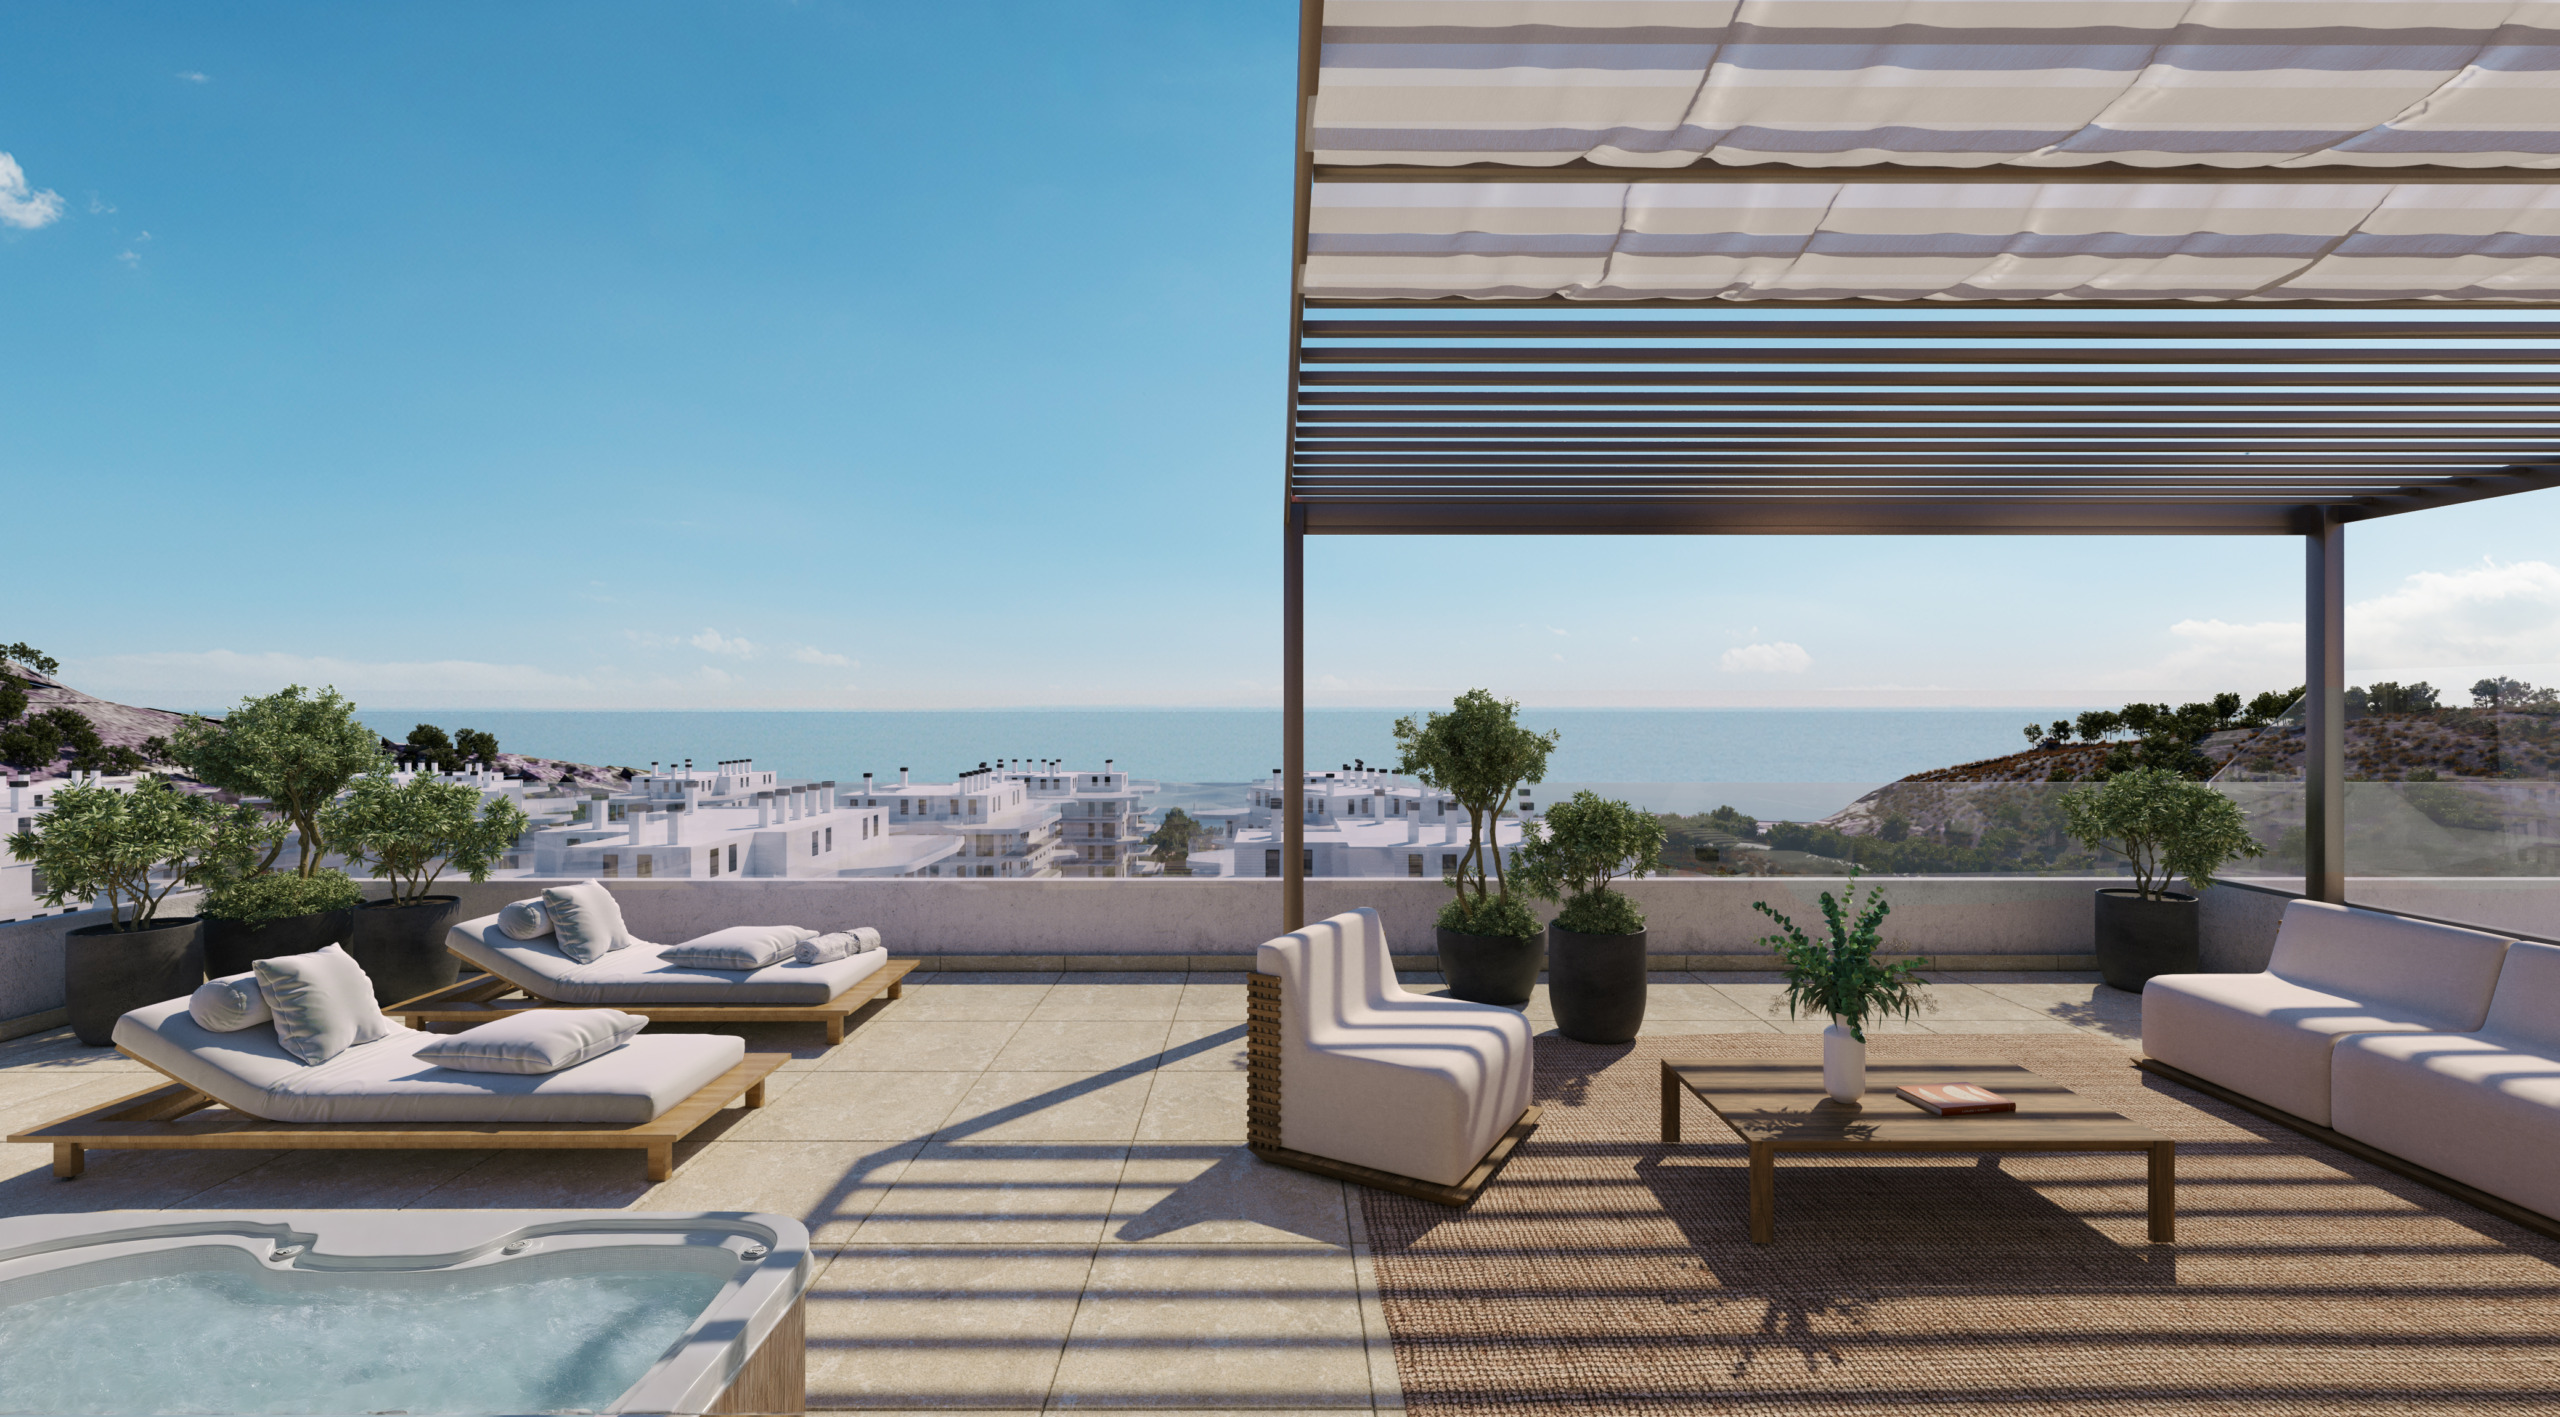 Apartments 200 meters from the beach in Villajoyosa, Alicante